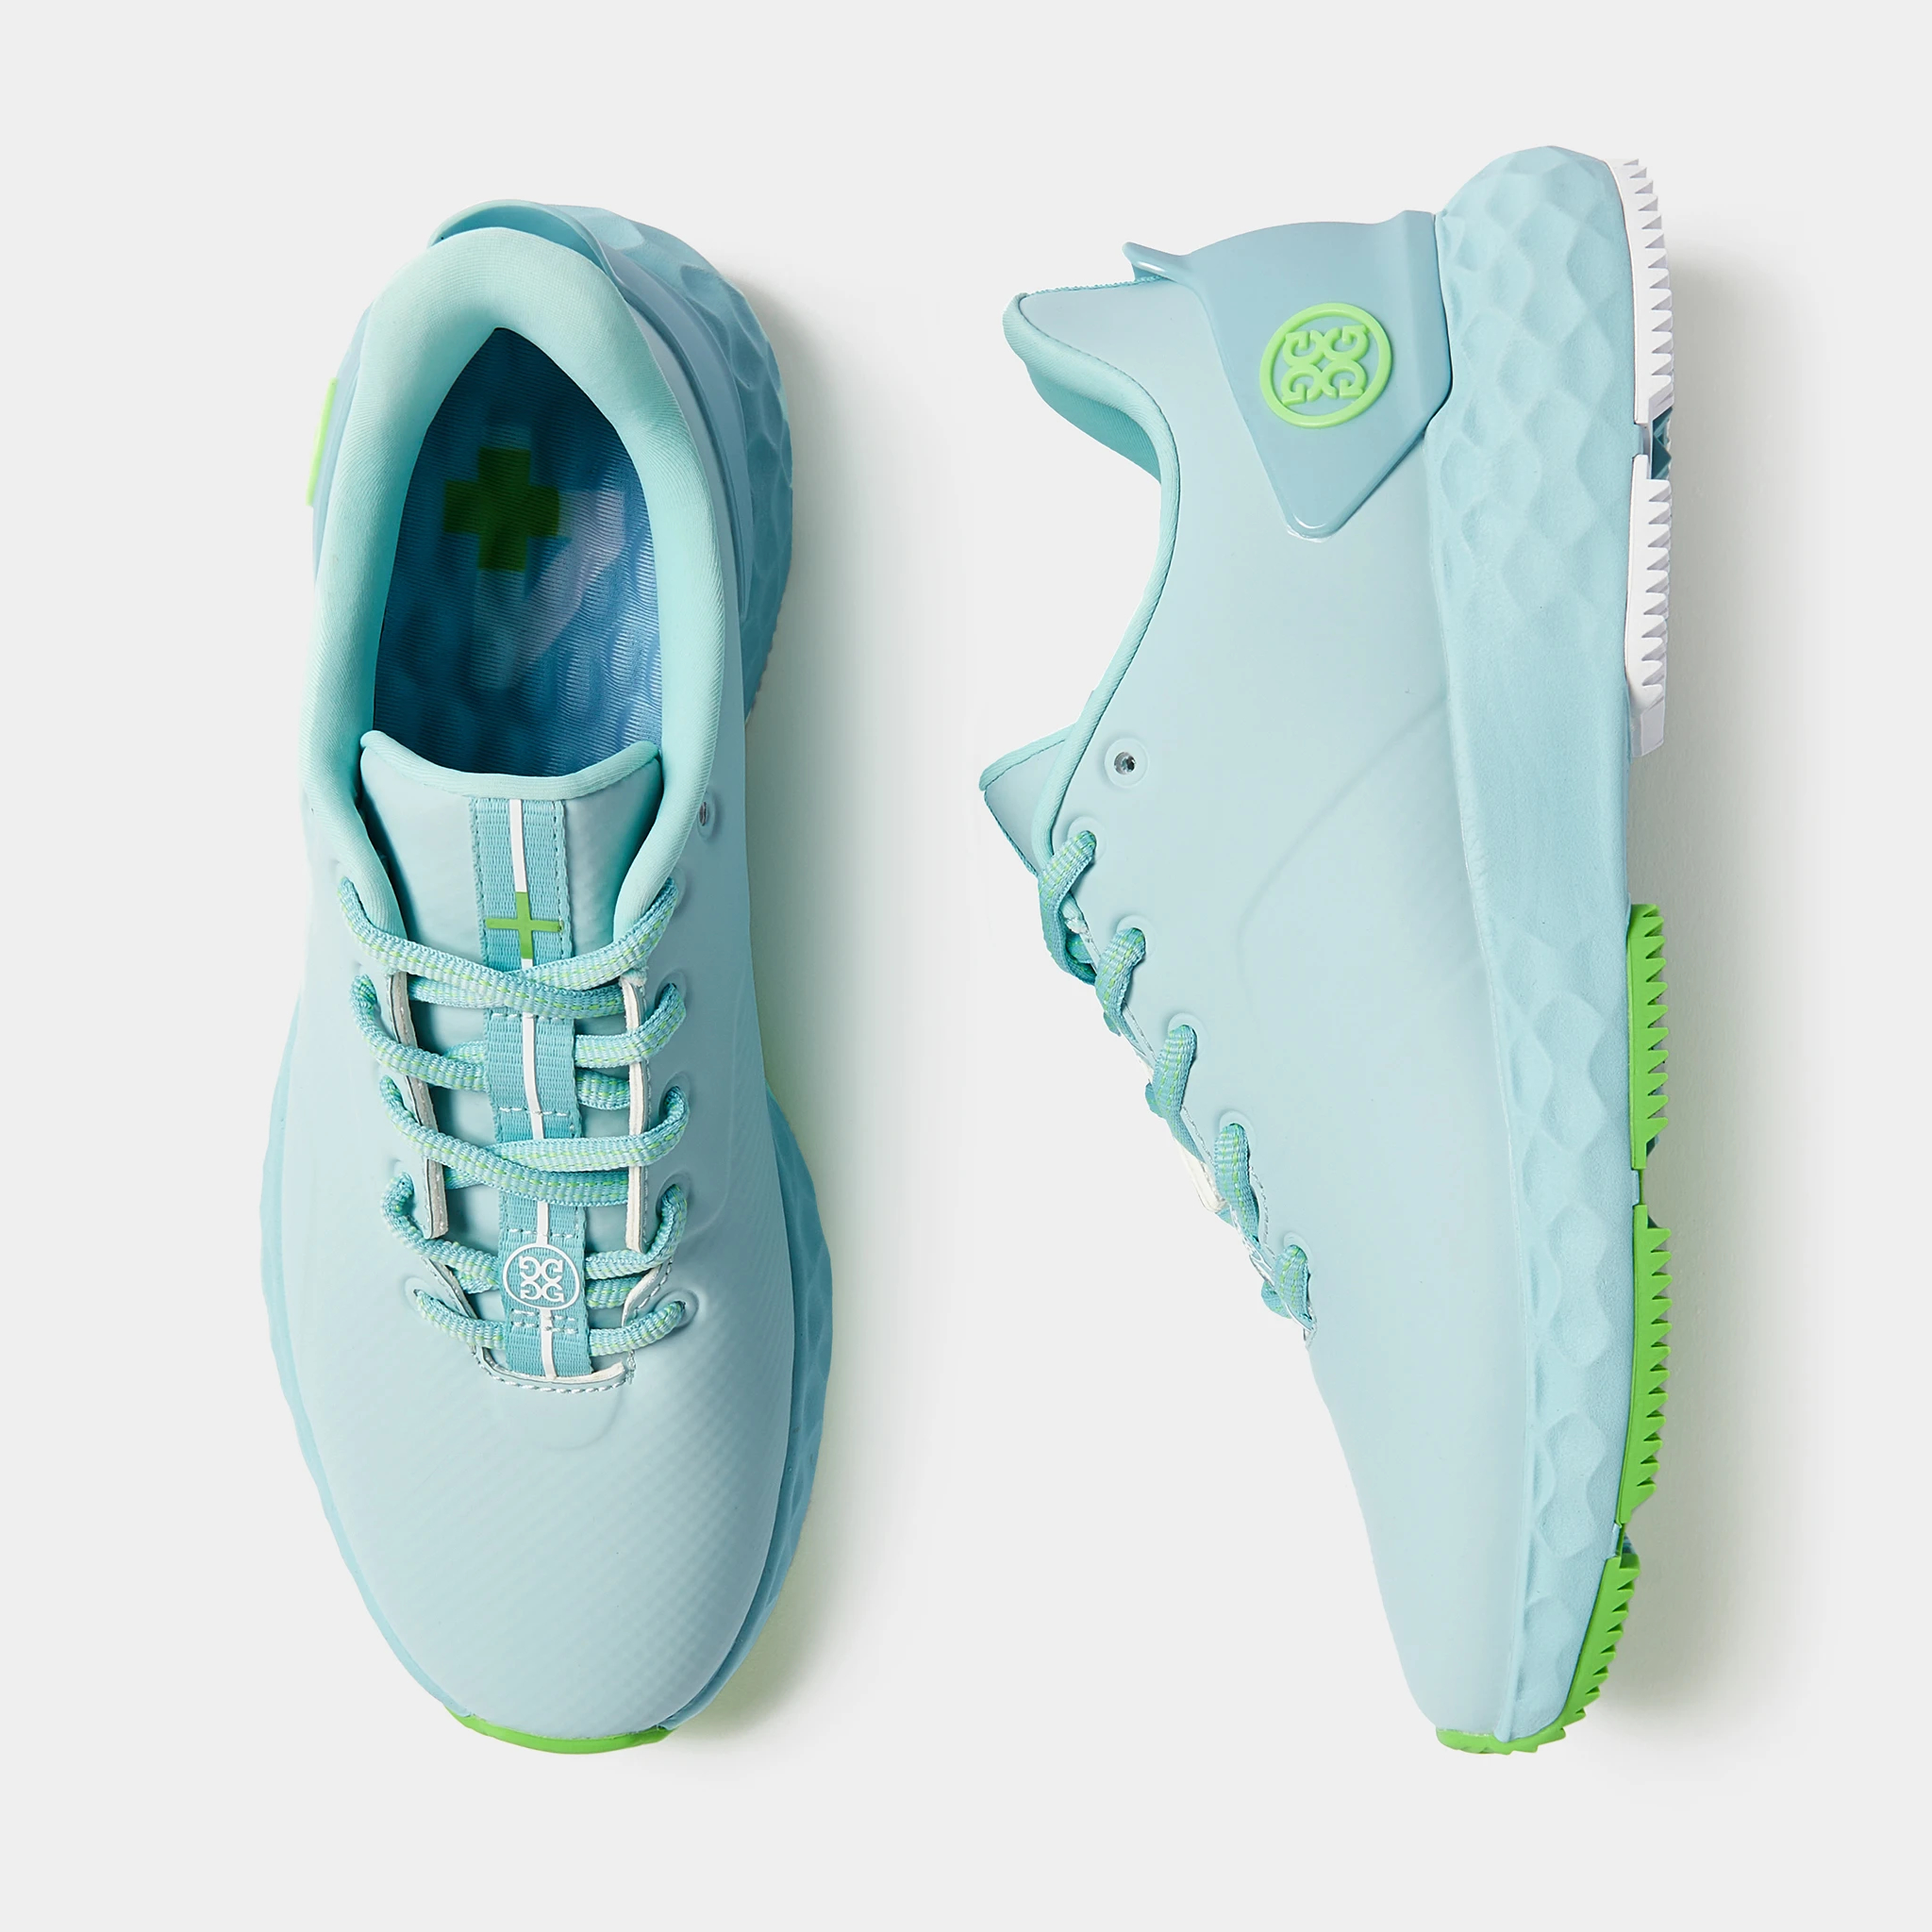 WOMEN'S MG4+ T.P.U. GOLF SHOE / G/FORE（ジーフォア）のシューズ通販 